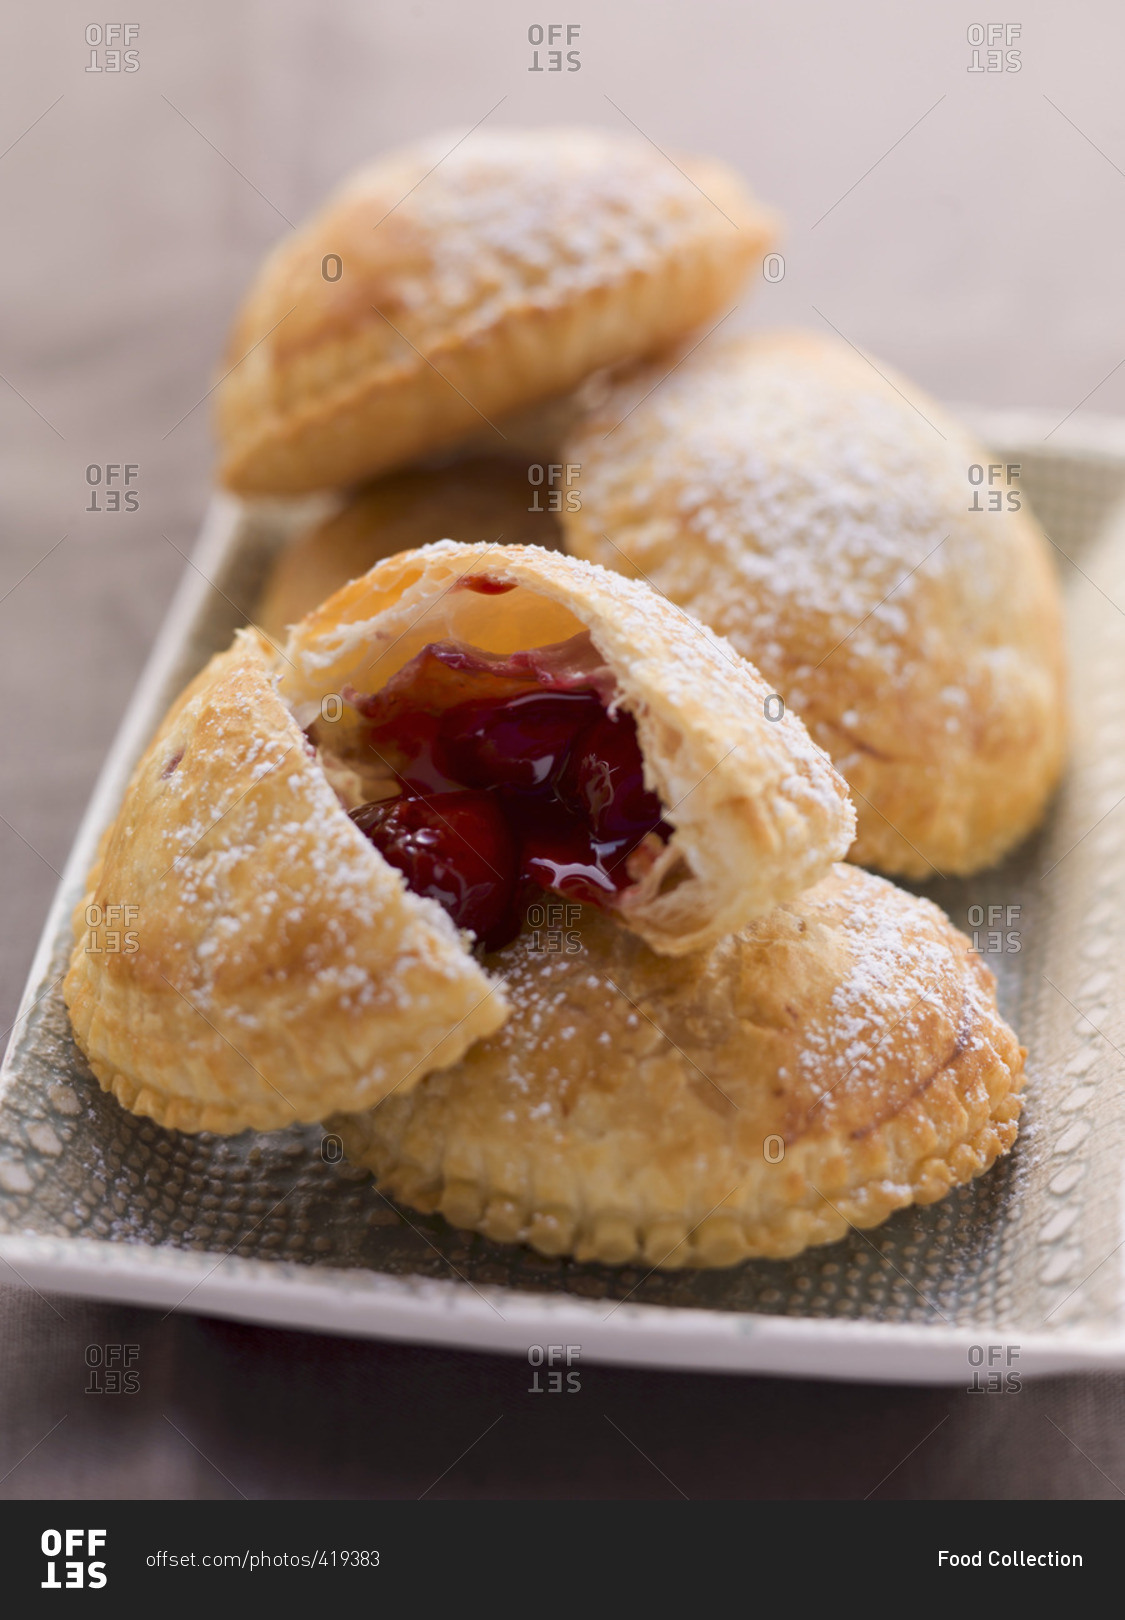 Puff pastries with a fruit filling